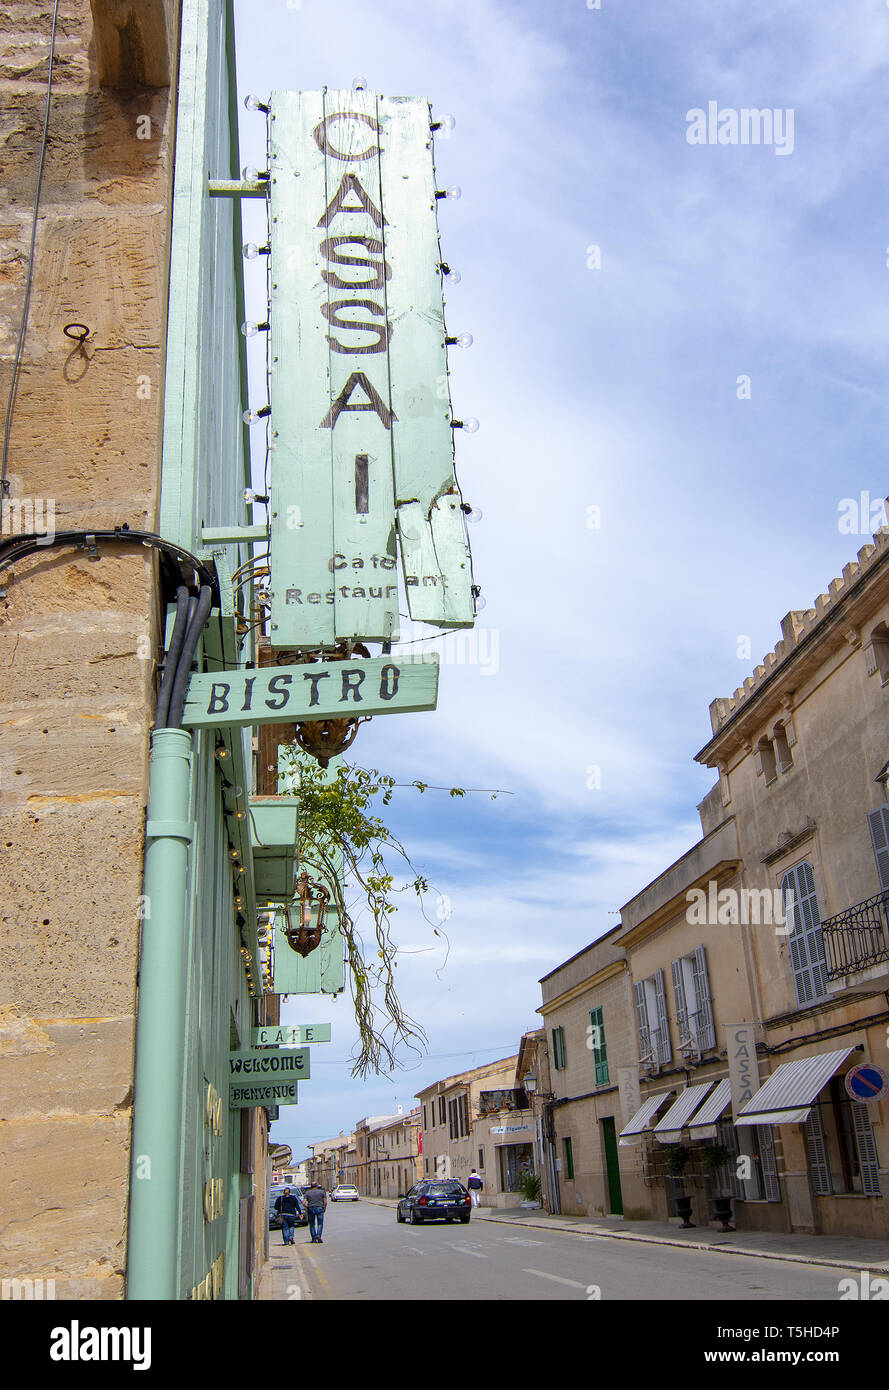 SES SALINES, MALLORCA, SPAIN - APRIL 15, 2019: Cozy Bar and restaurant Cassai exterior street view and interior details in central city on an overcast Stock Photo